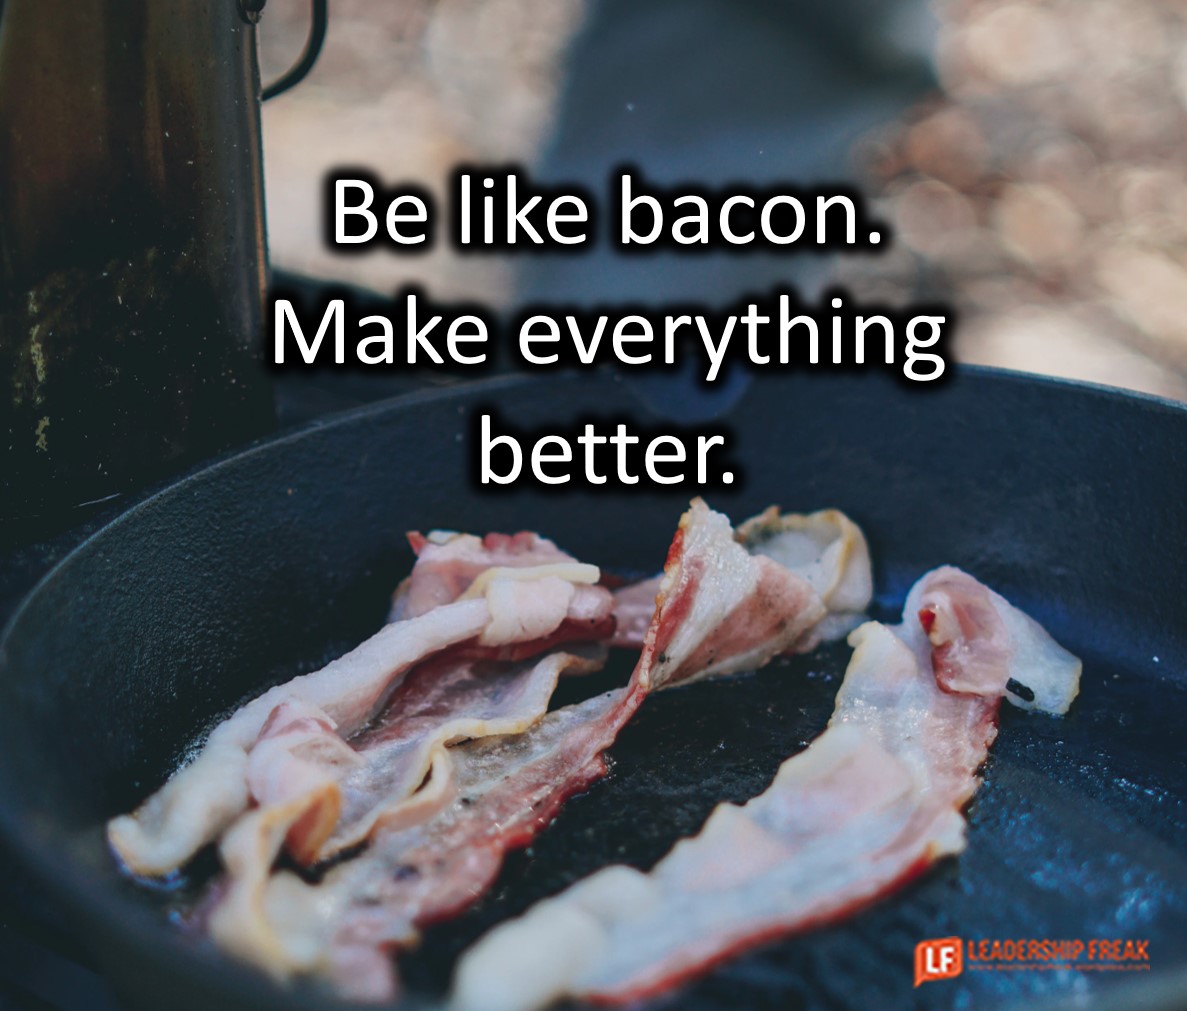 Bacon Inspires Boldness and Makes Things Better